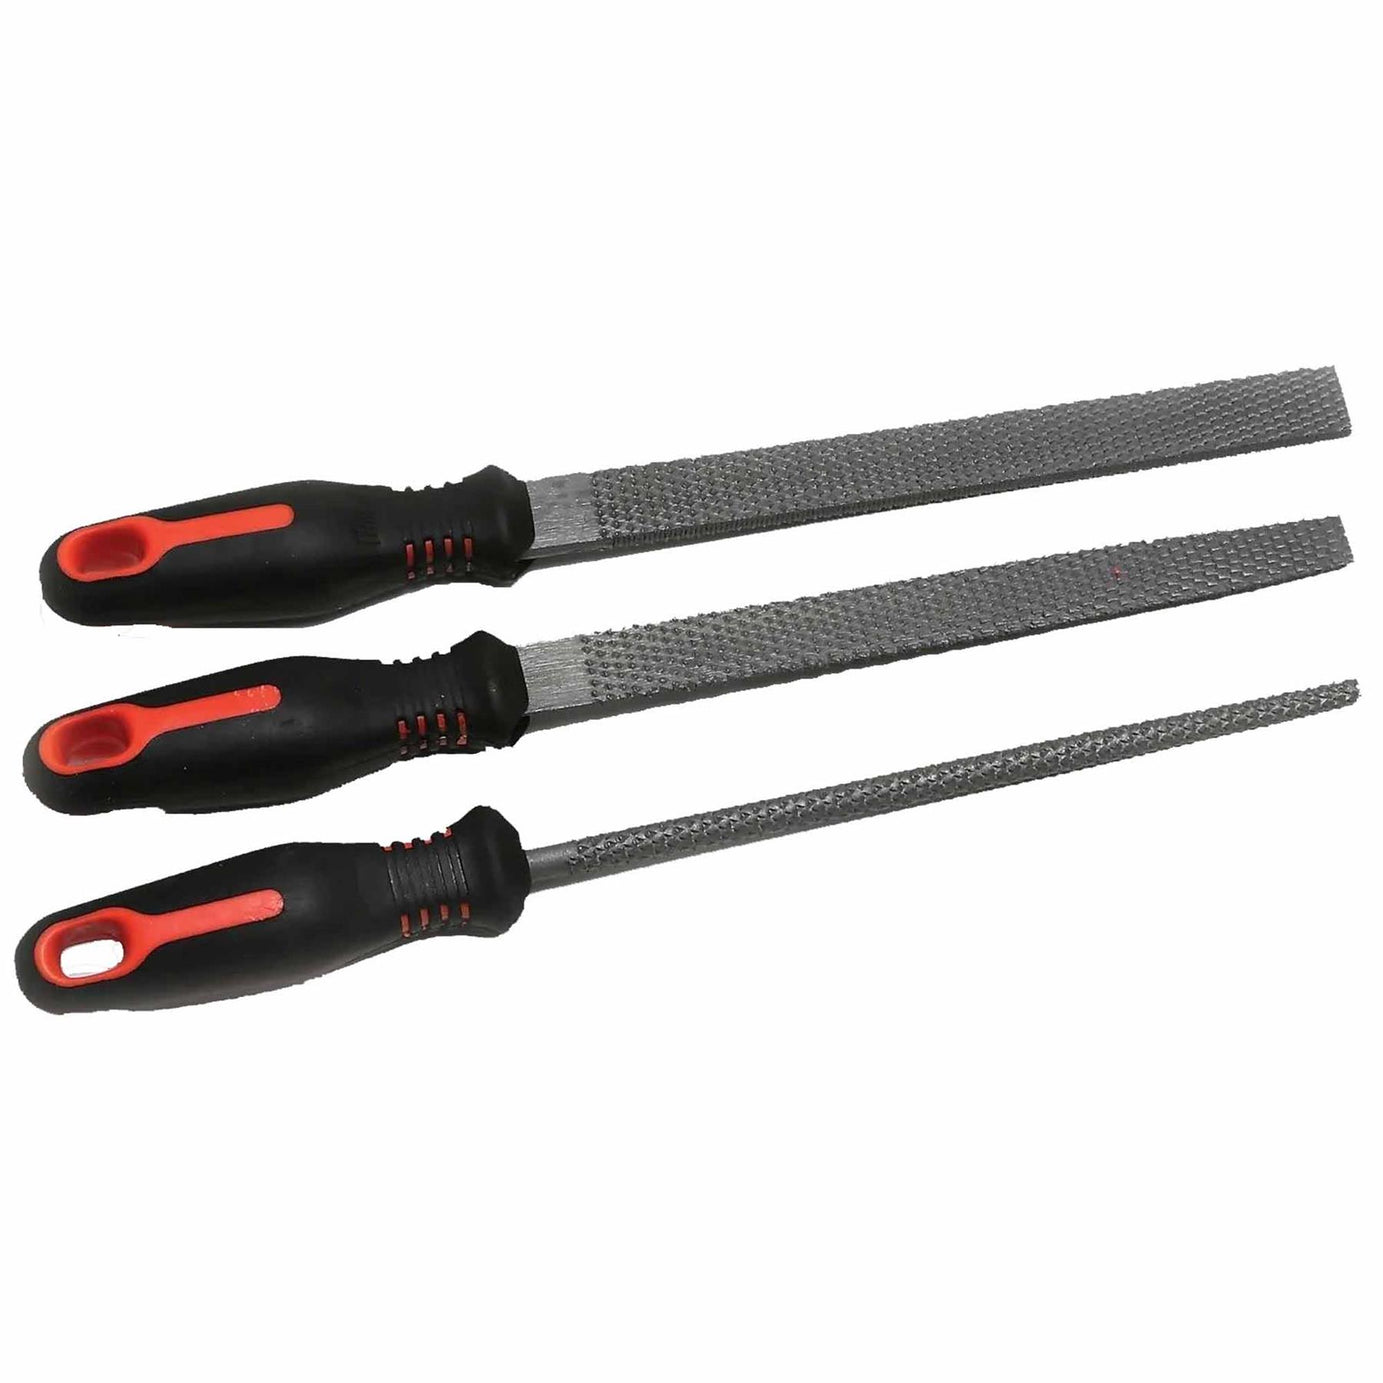 3pcs 8" / 200mm Wood Rasp File Set with Soft Grips Woodworking Carpentry